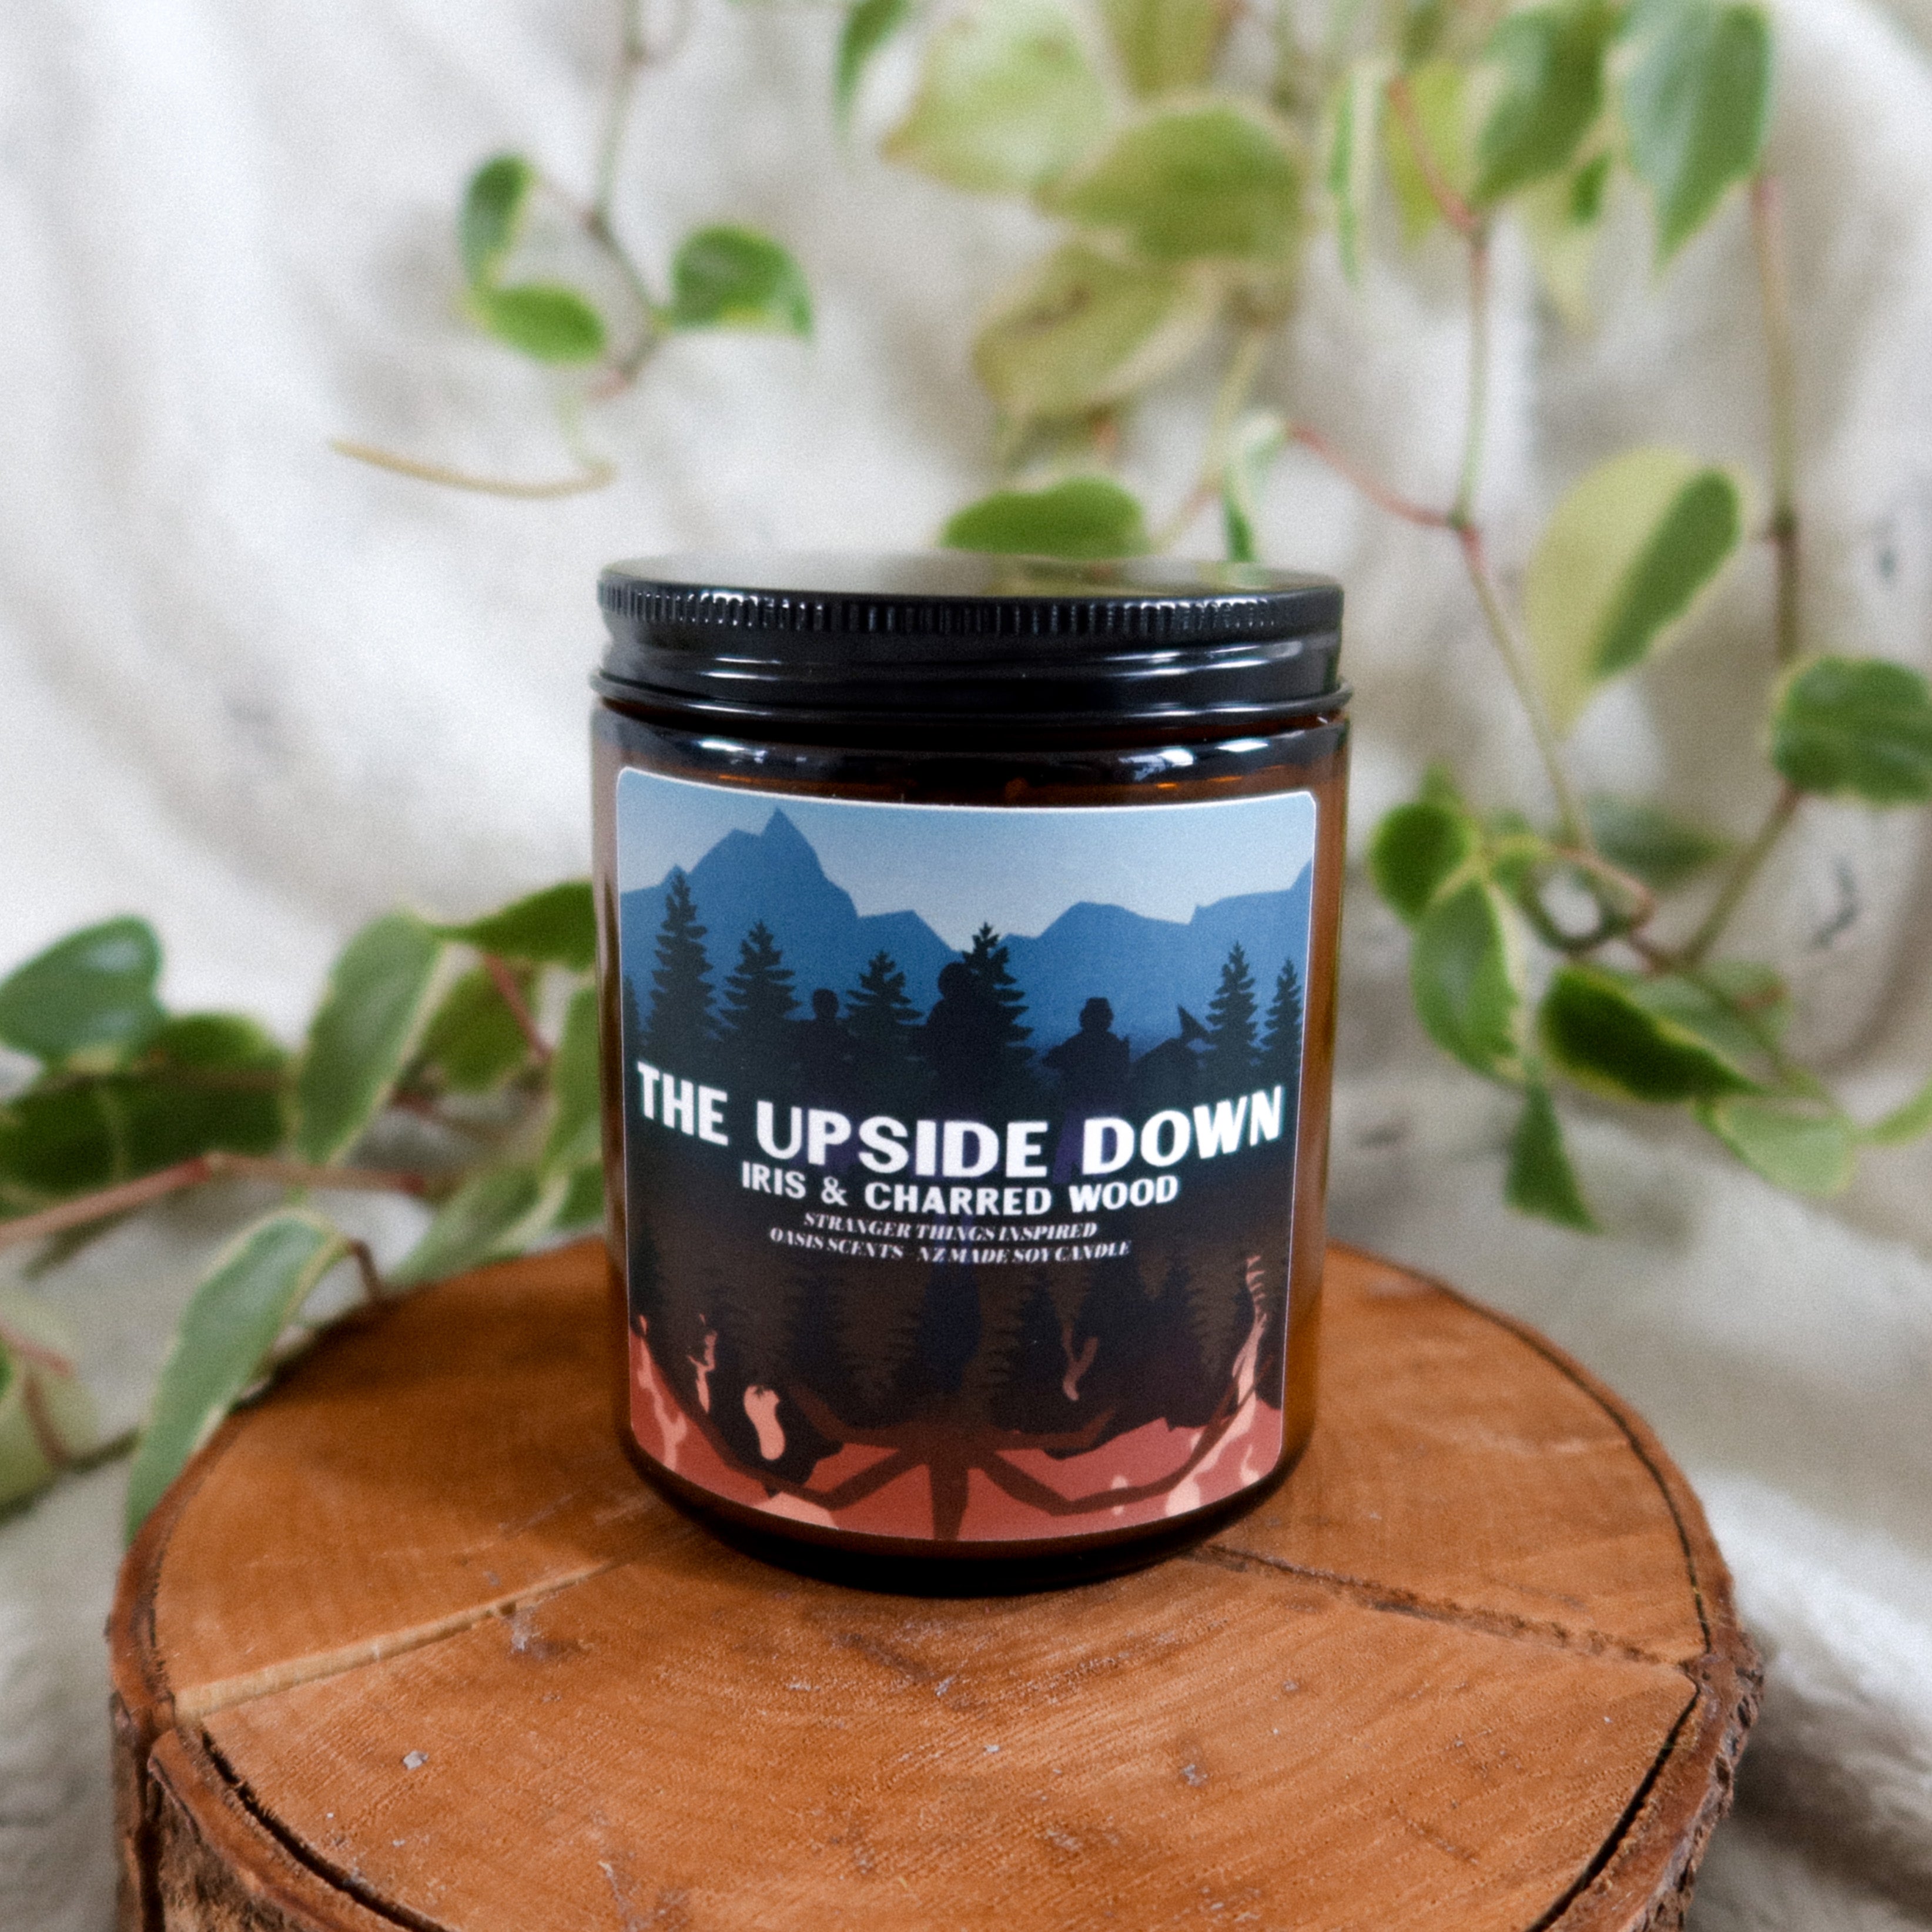 The Upside Down Woodwick Soy Candle